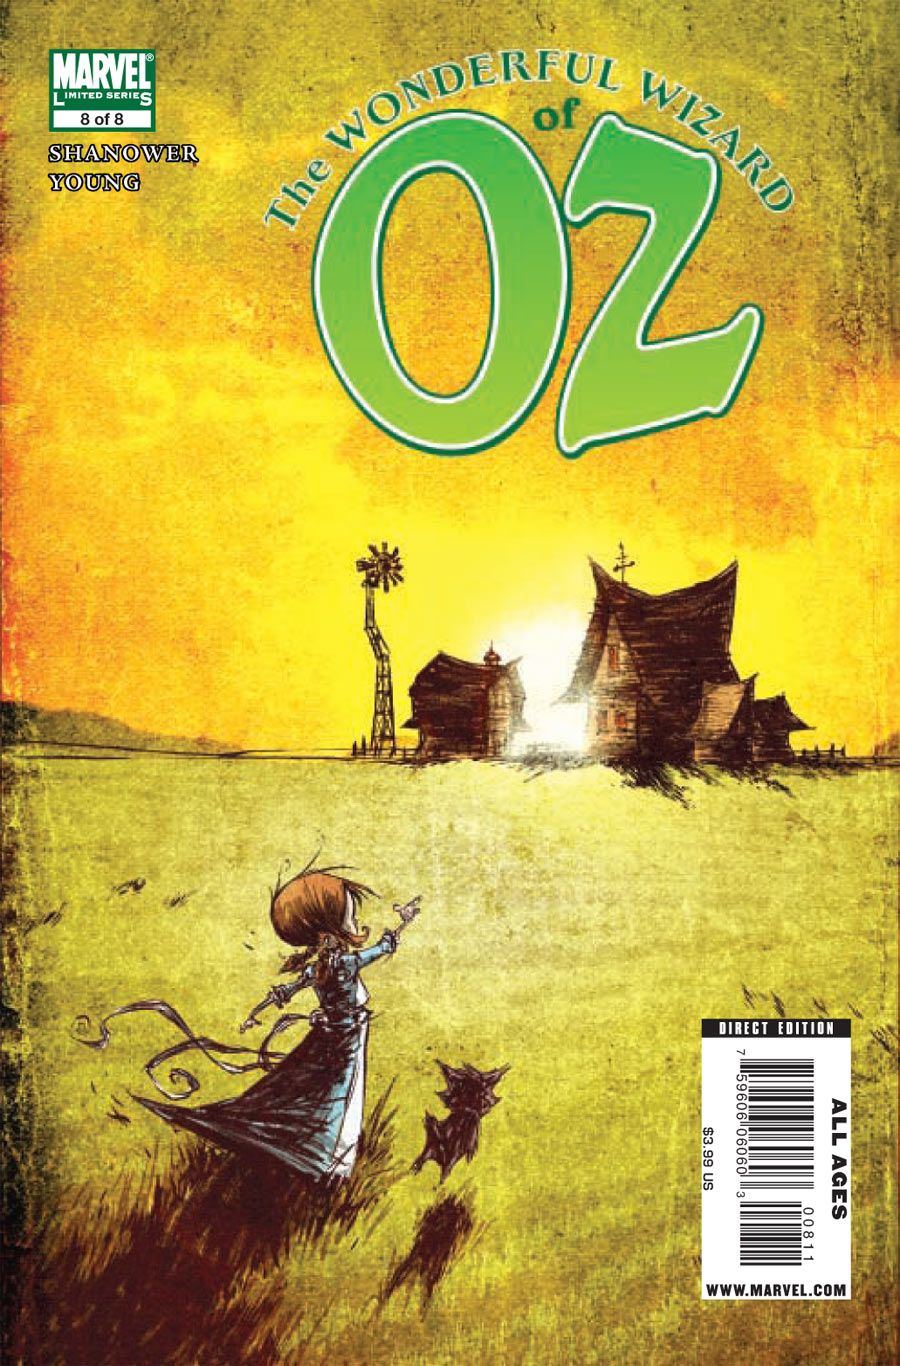 the book the wonderful wizard of oz was written by